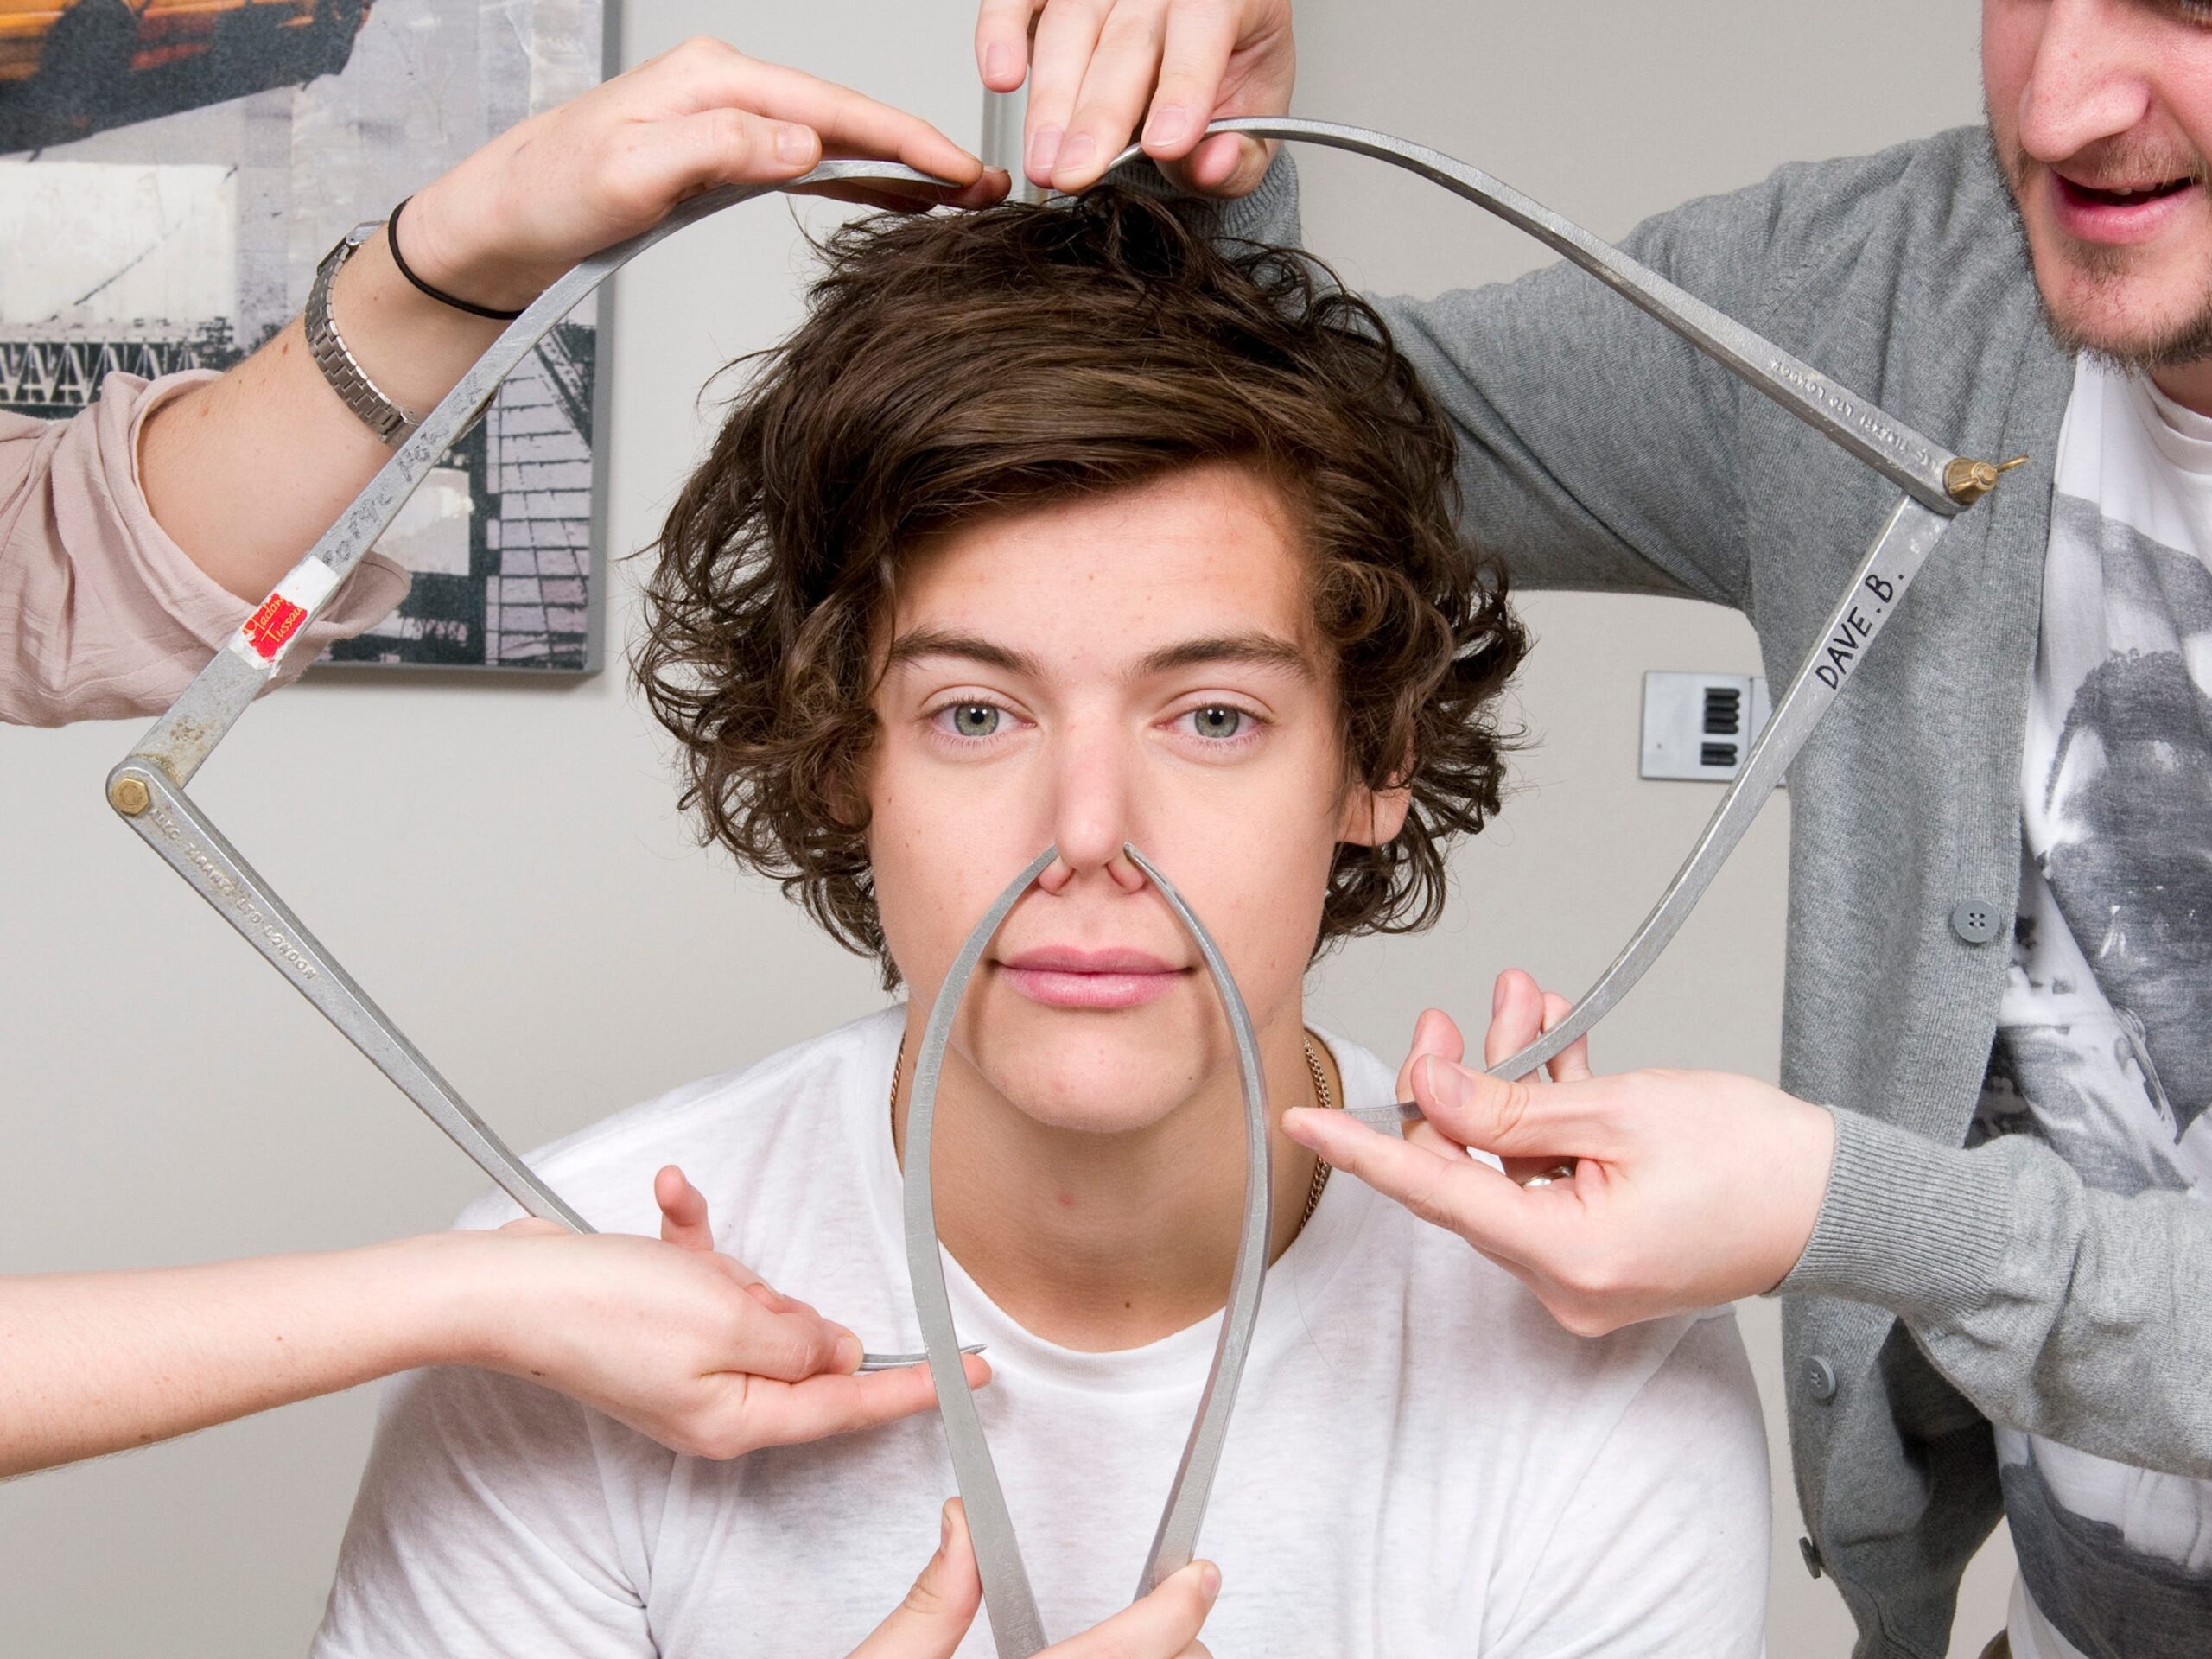 Harry Styles of One Direction poses with calipers during a figure sitting where he is measured for a wax figure creation in 2013.